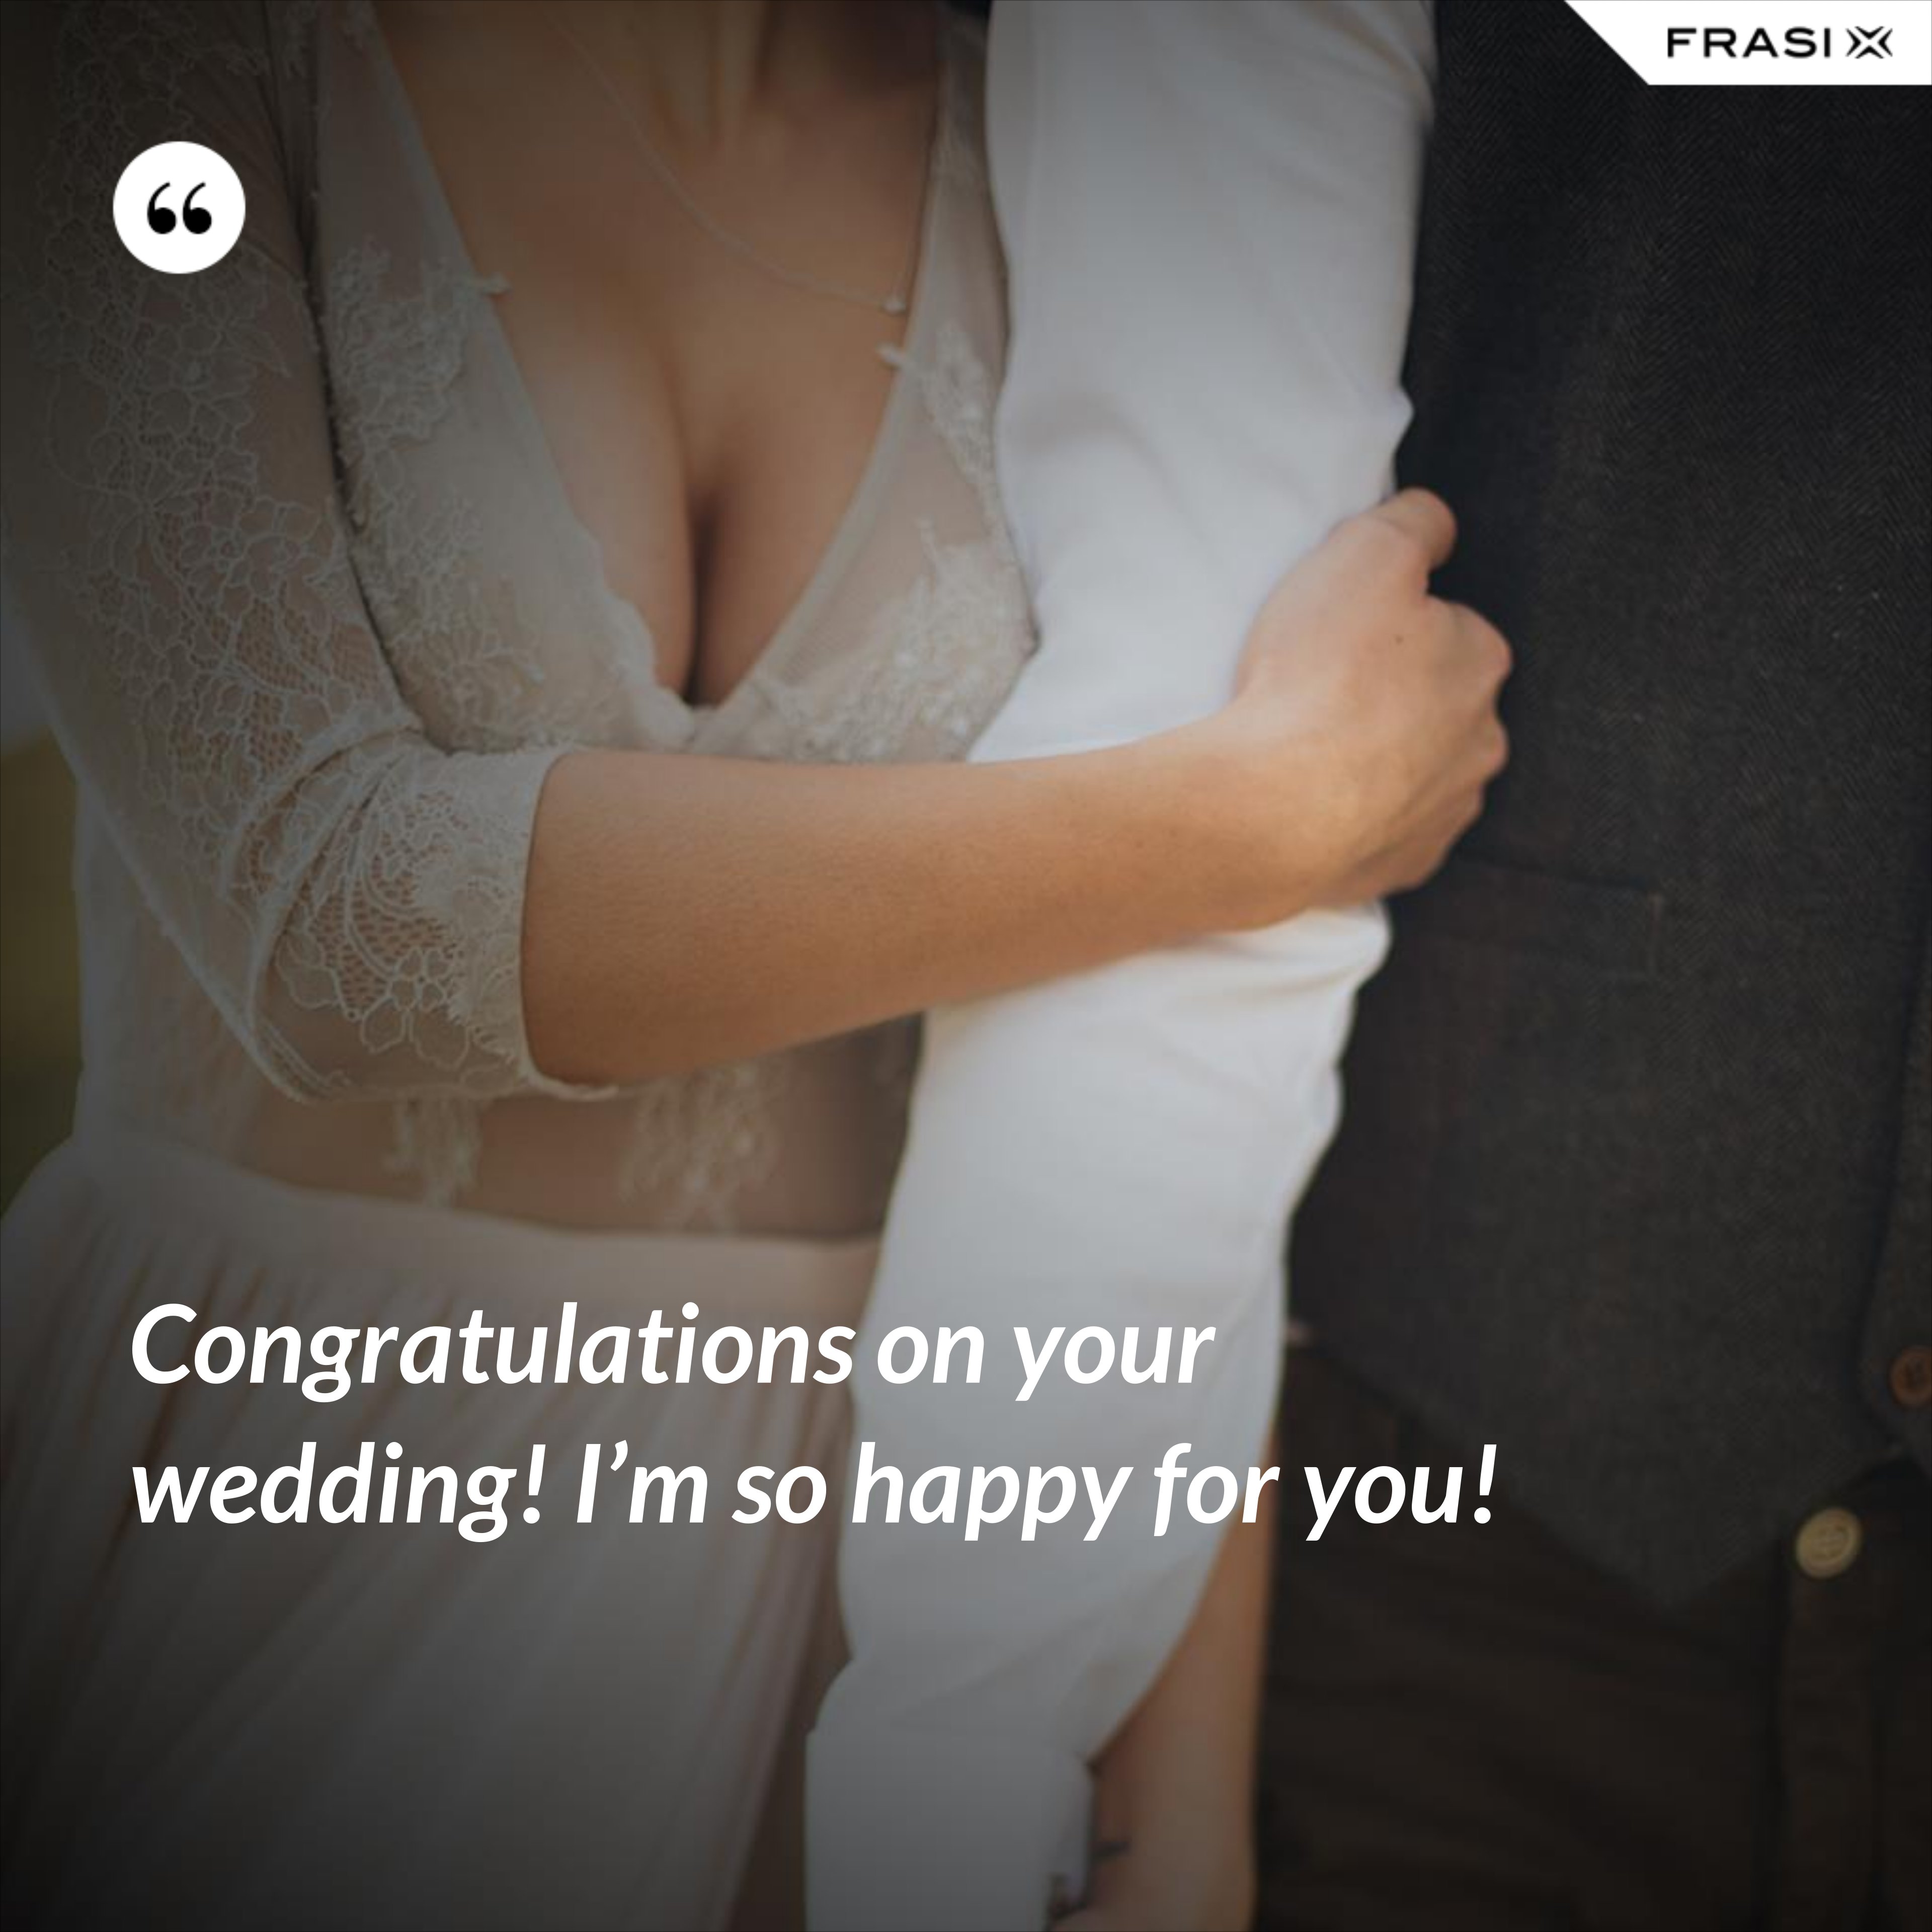 Congratulations on your wedding! I’m so happy for you! - Anonimo